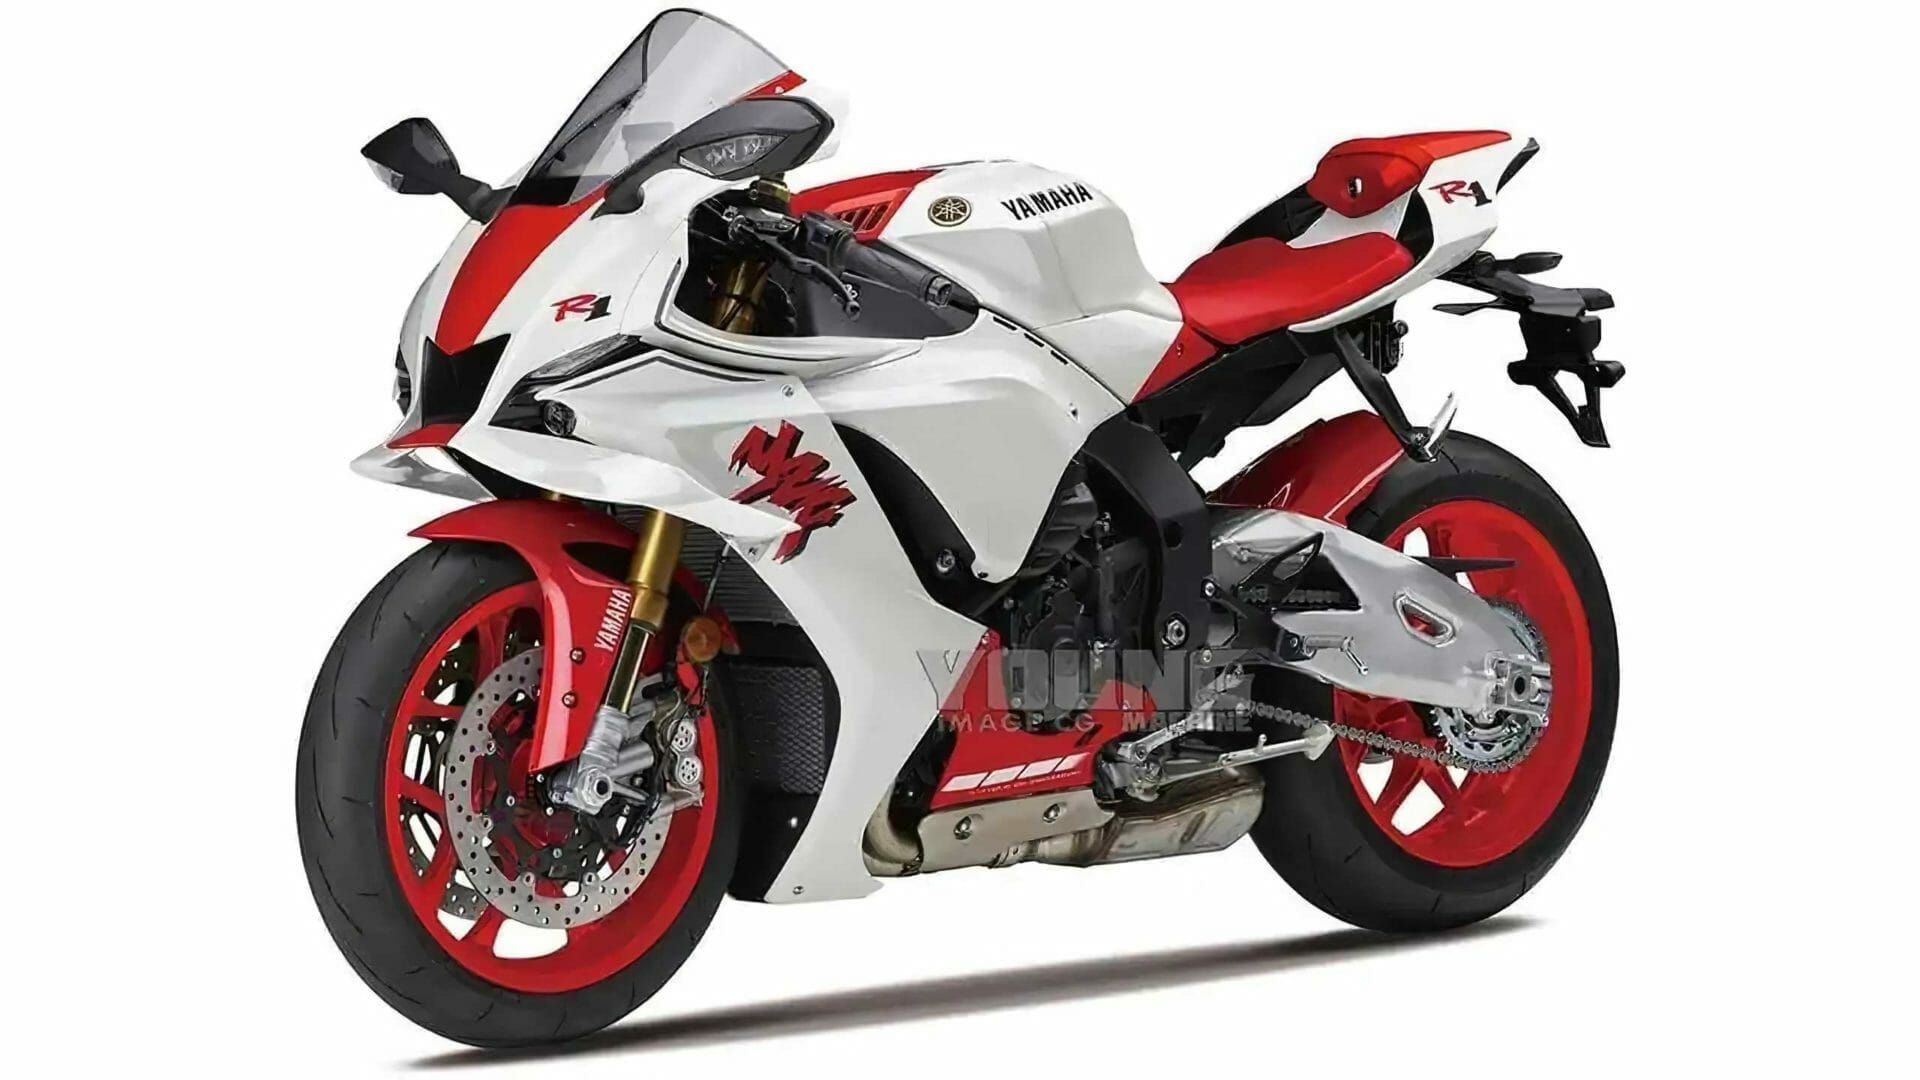 Upgraded Yamaha R1 for the 25th anniversary or new R1? Motorcycles